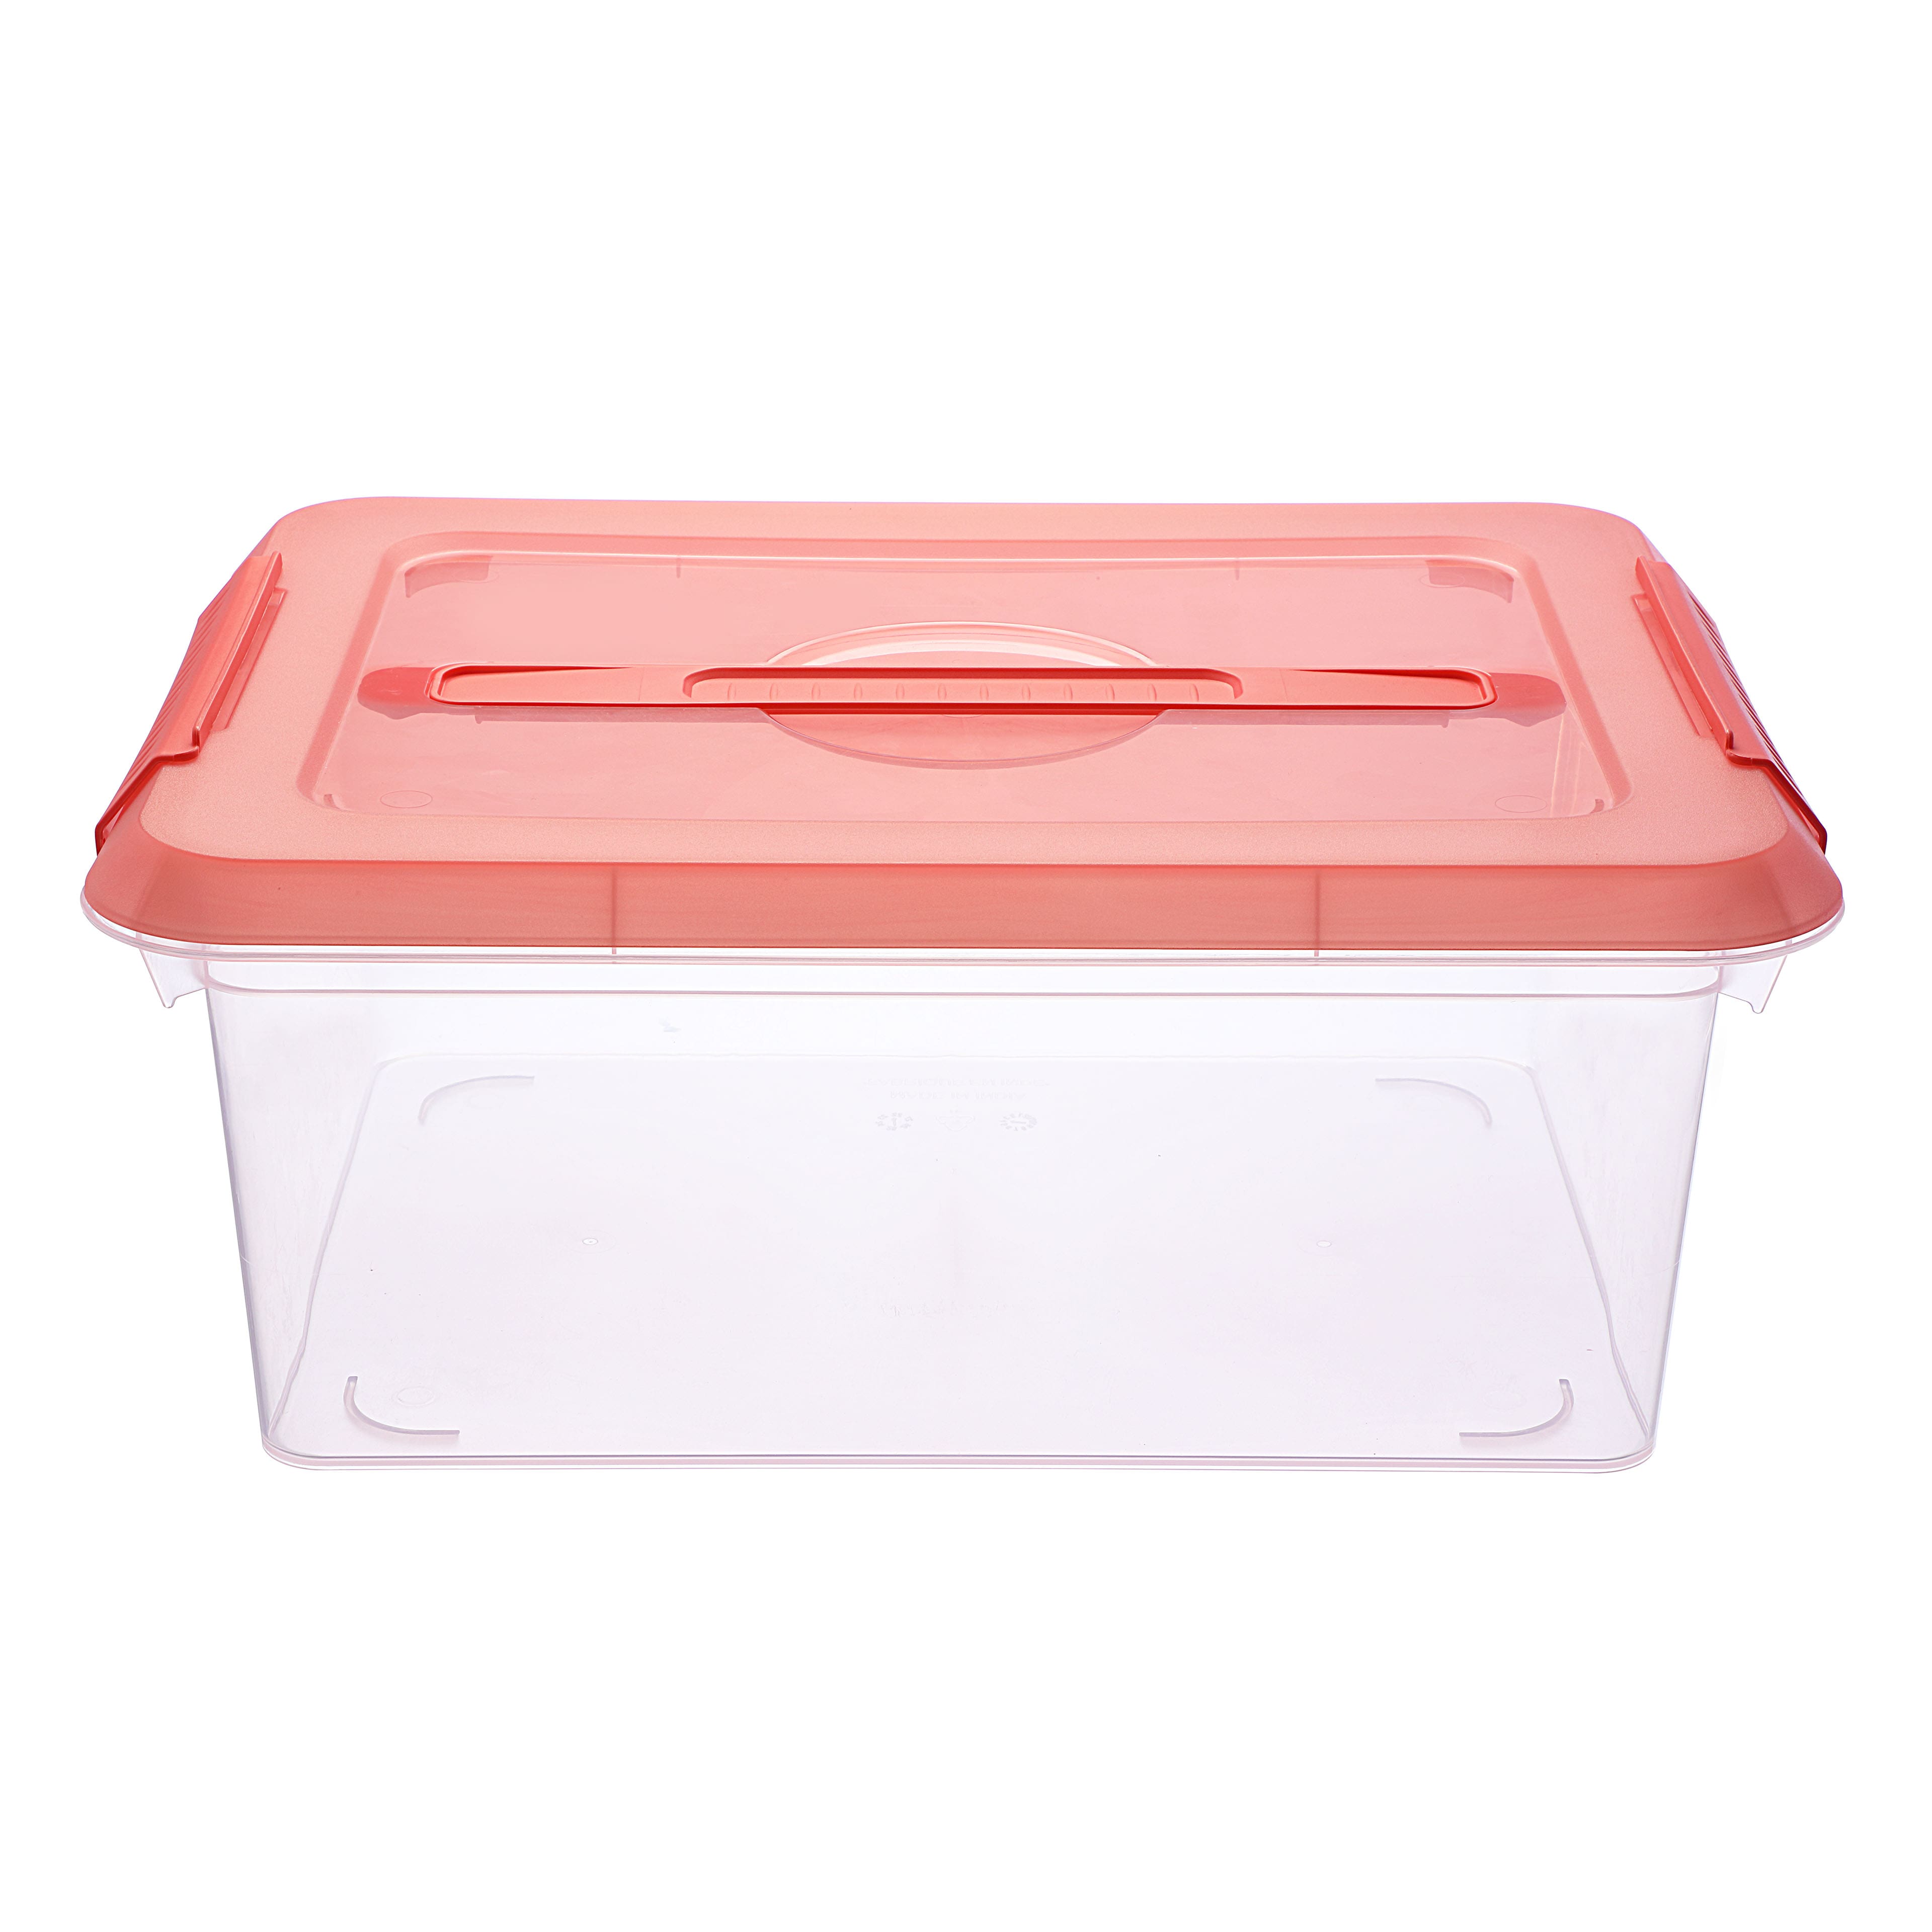 Mdesign Aqua Tint 4-Section Craft Caddy With Handle | Michaels